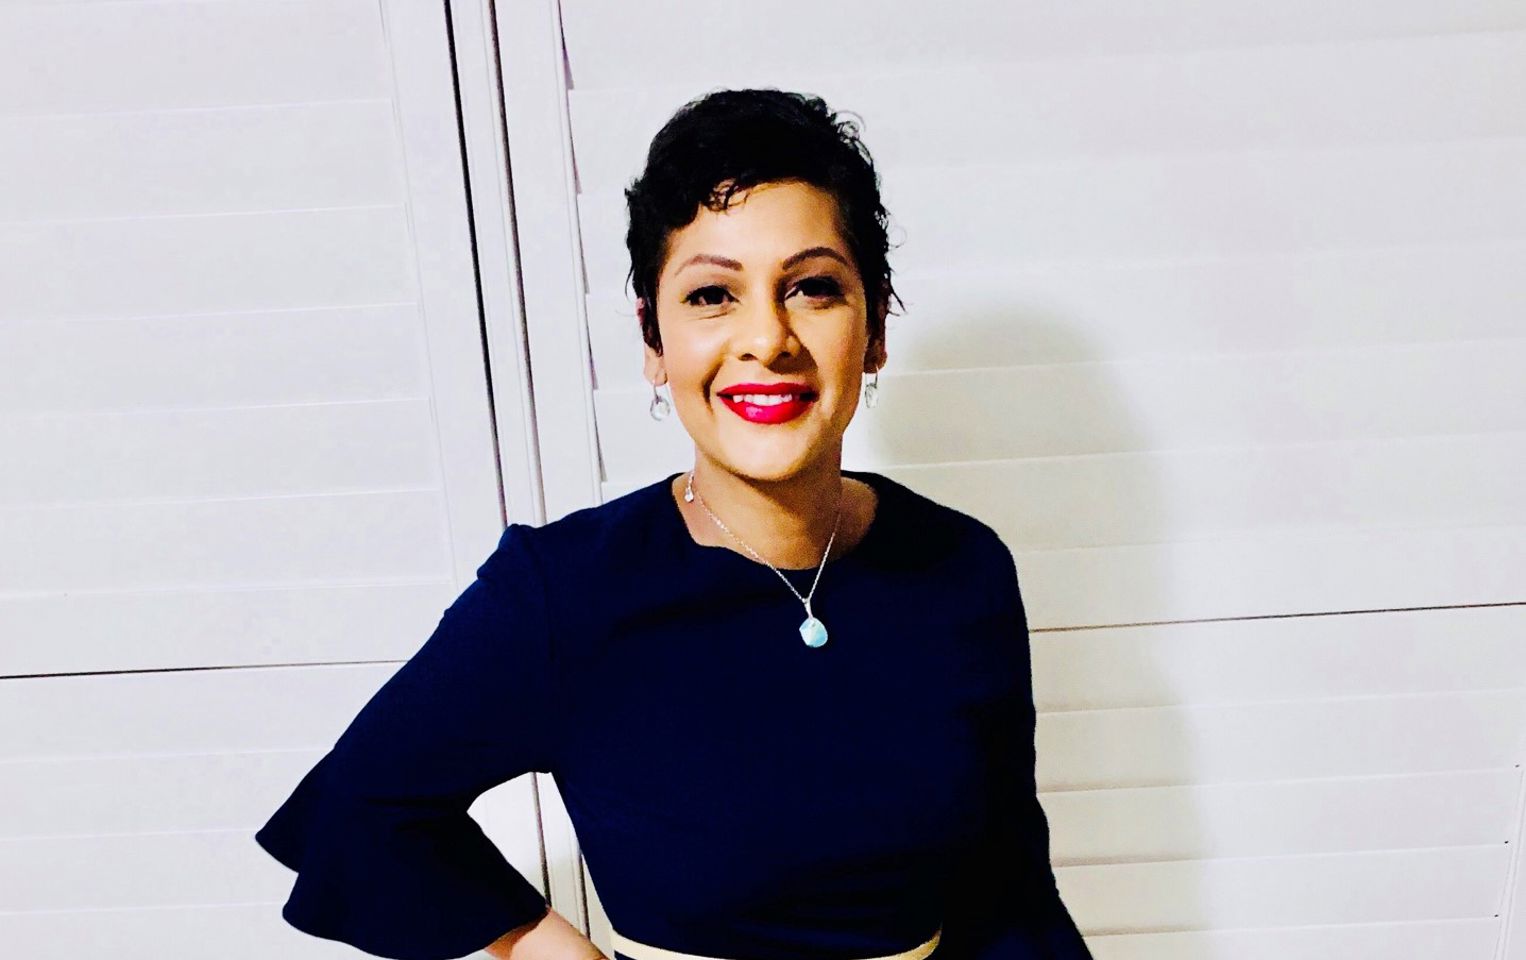 Nadine with her hand on hip, smiling at the camera with short hair